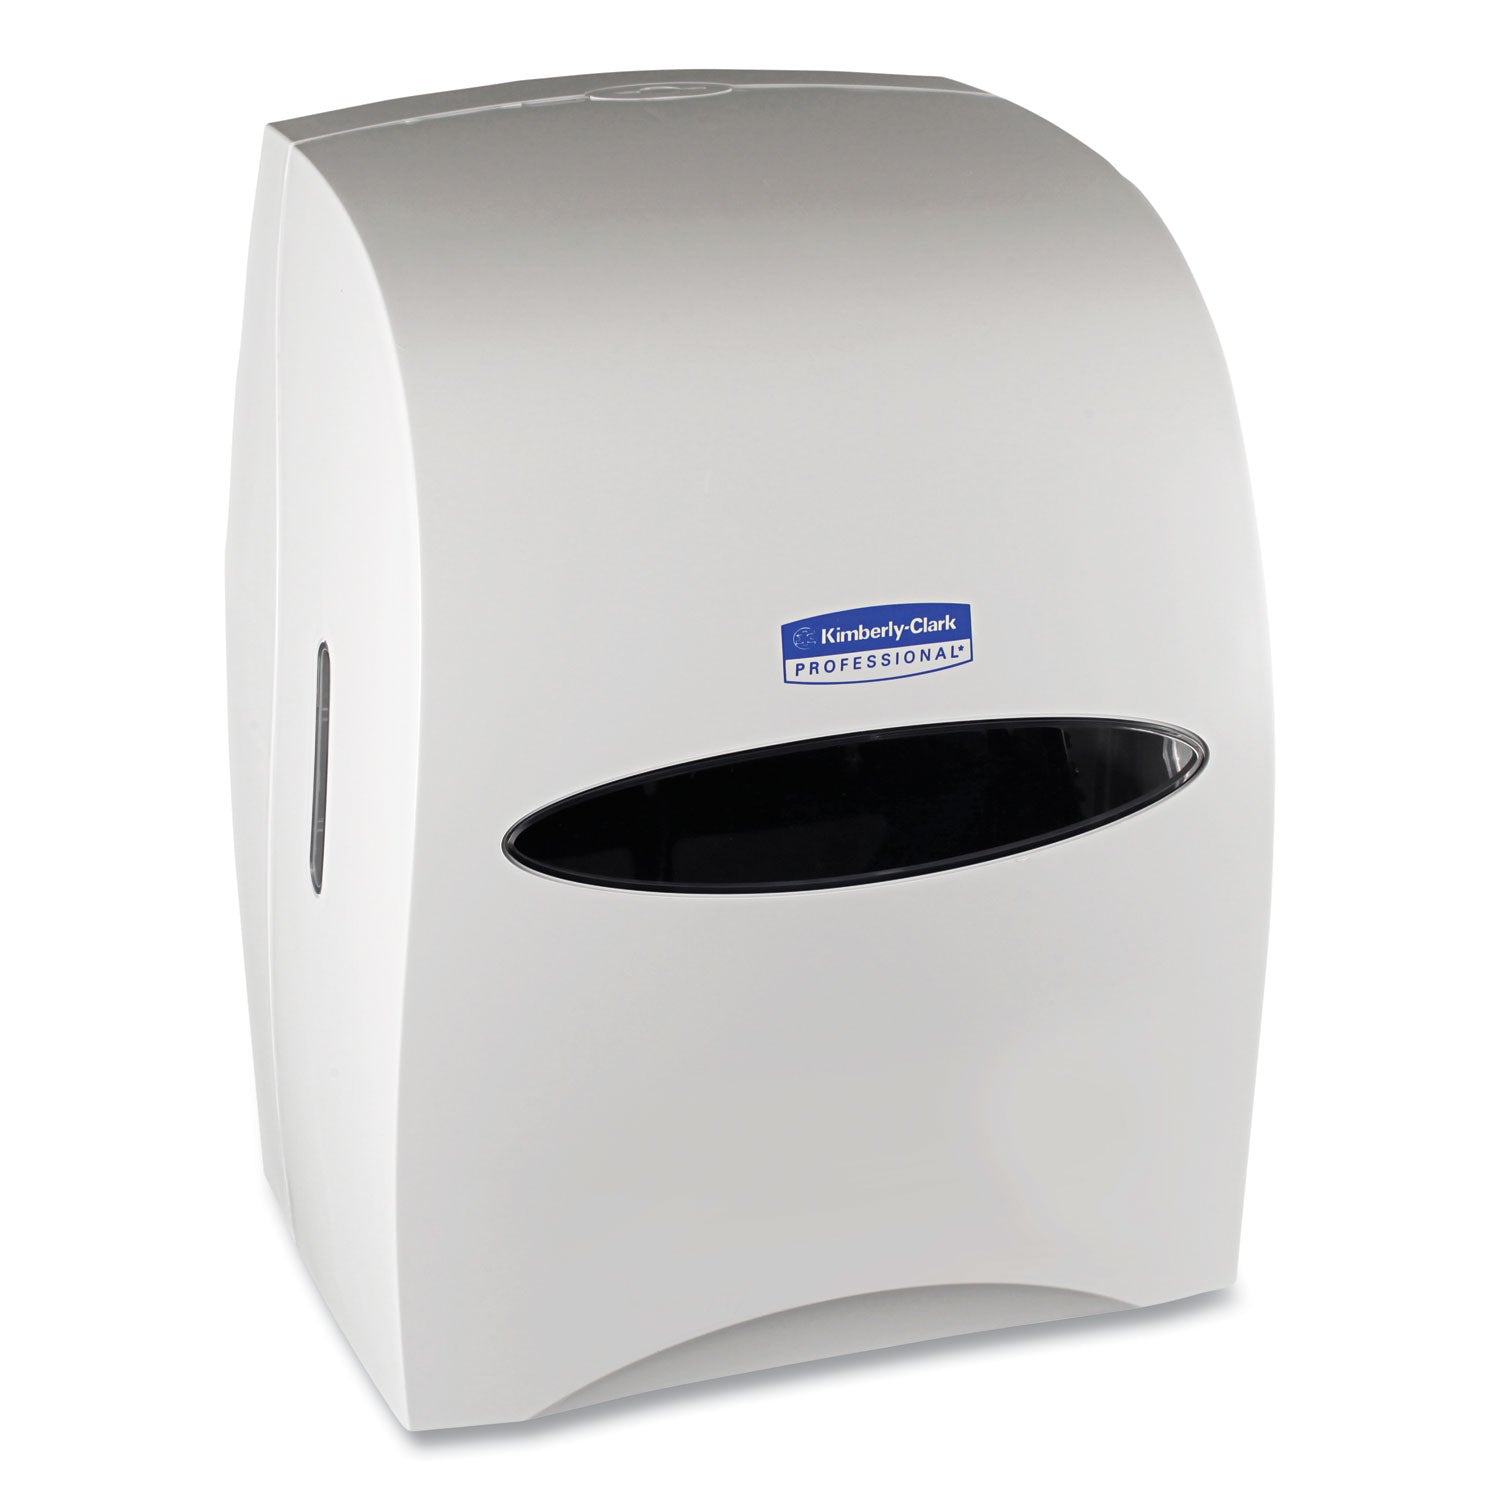 sanitouch-hard-roll-towel-dispenser-1263-x-102-x-1613-white_kcc09995 - 1